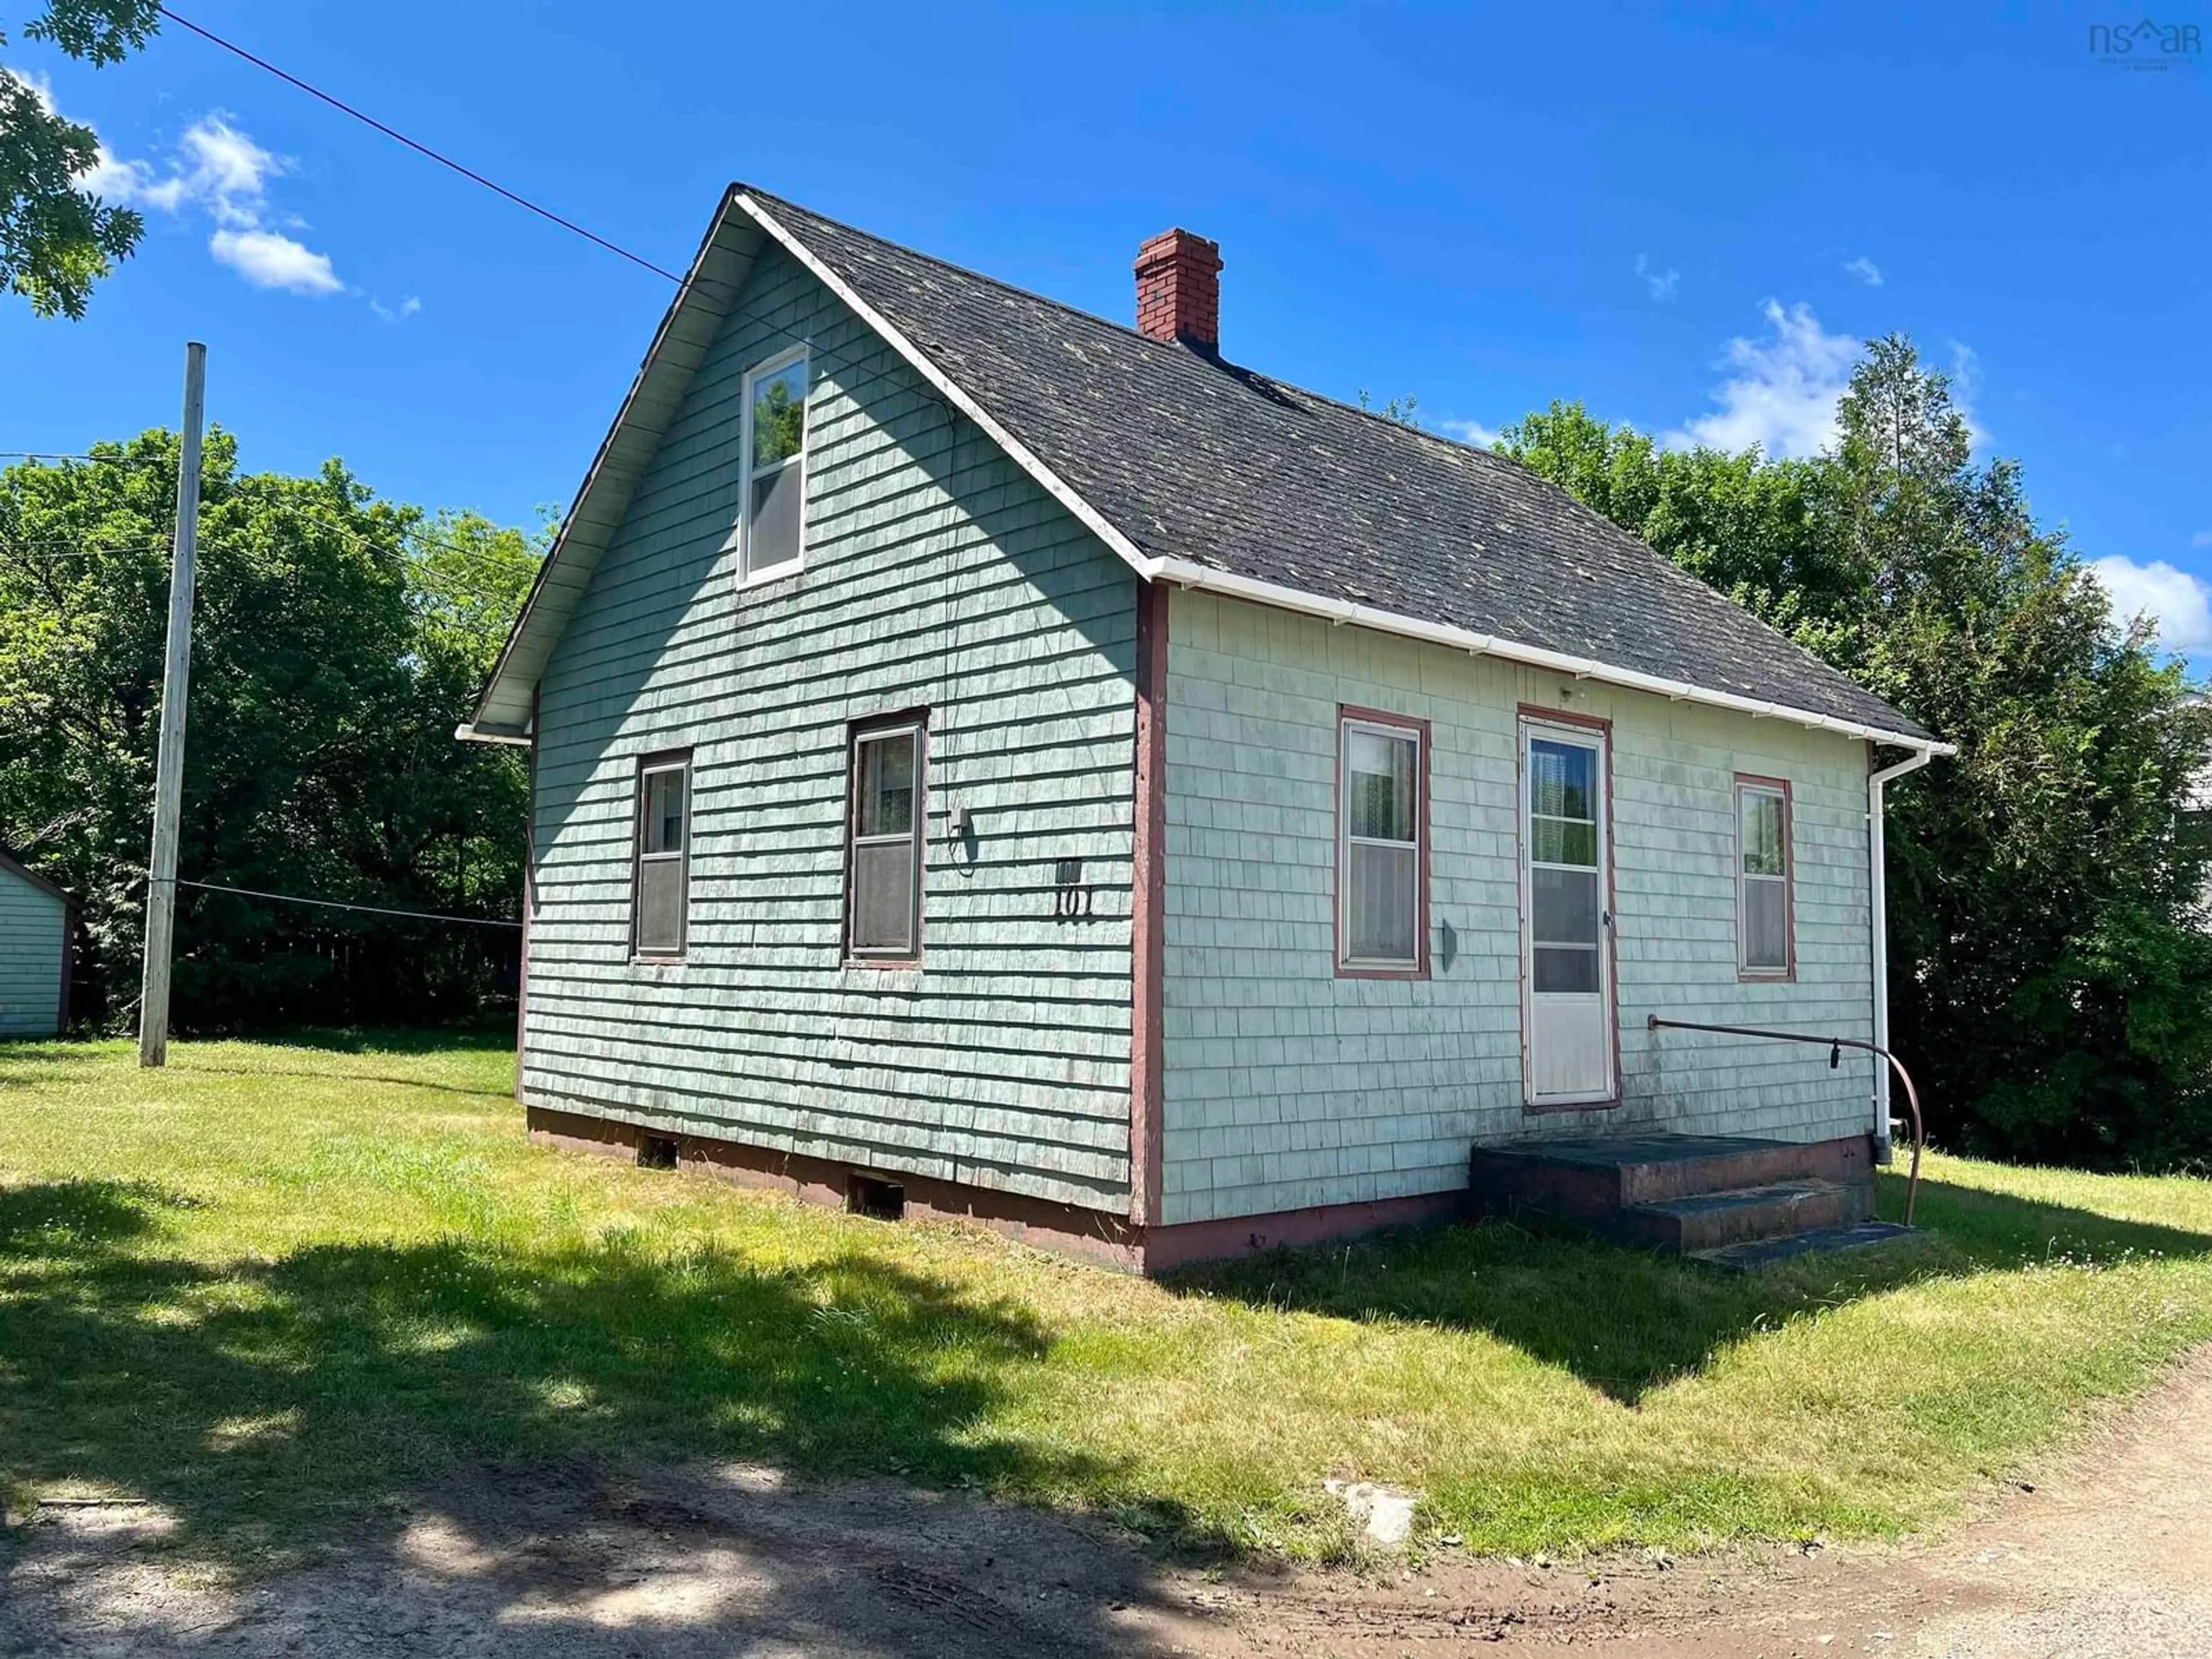 Frontside or backside of a home for 101 Clements St, Shelburne Nova Scotia B0T 1W0